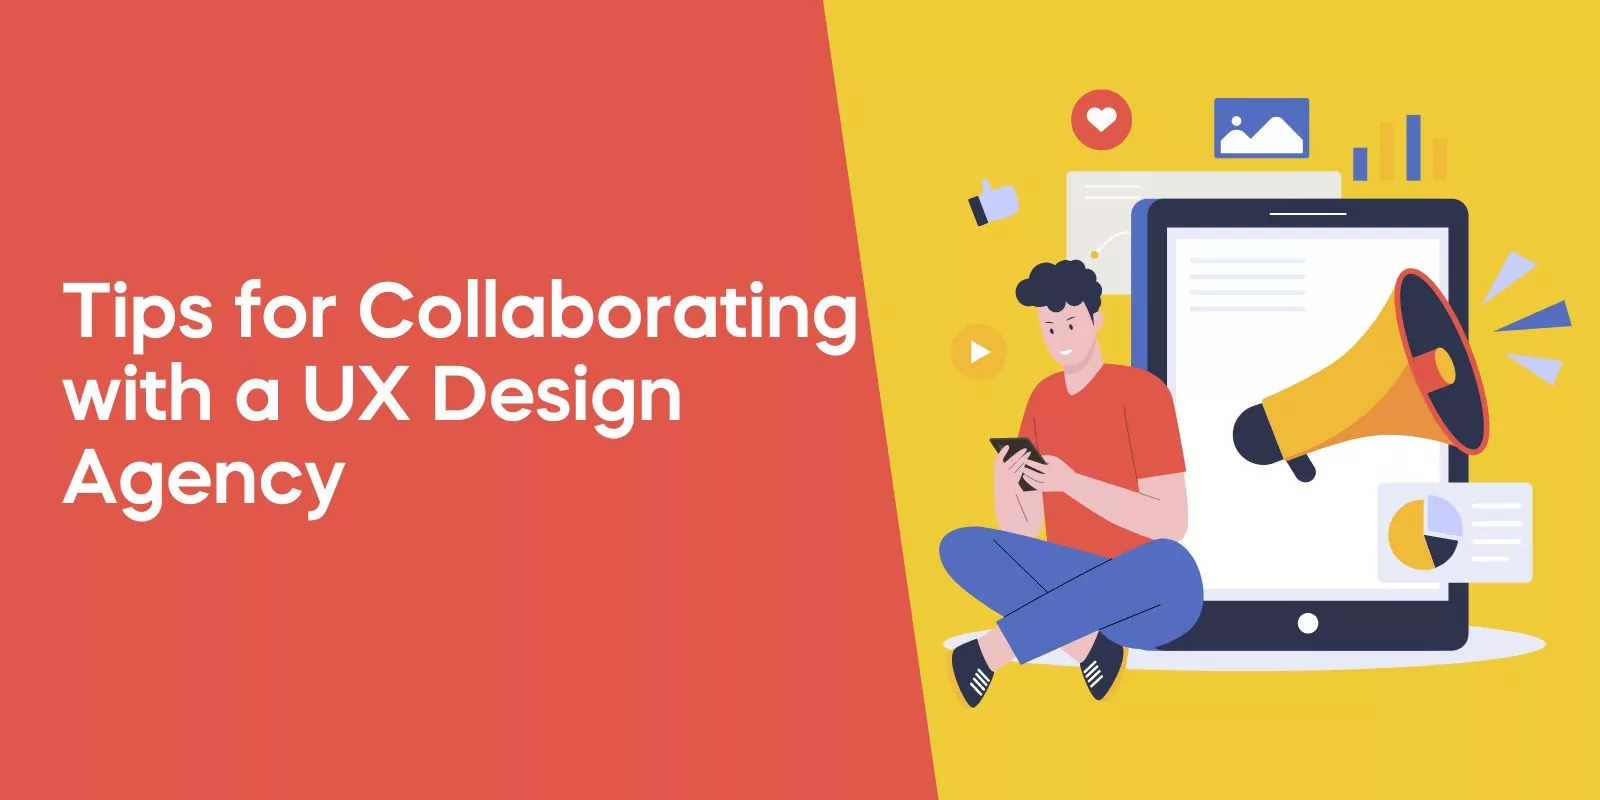 Tips for Collaborating with a UX Design Agency